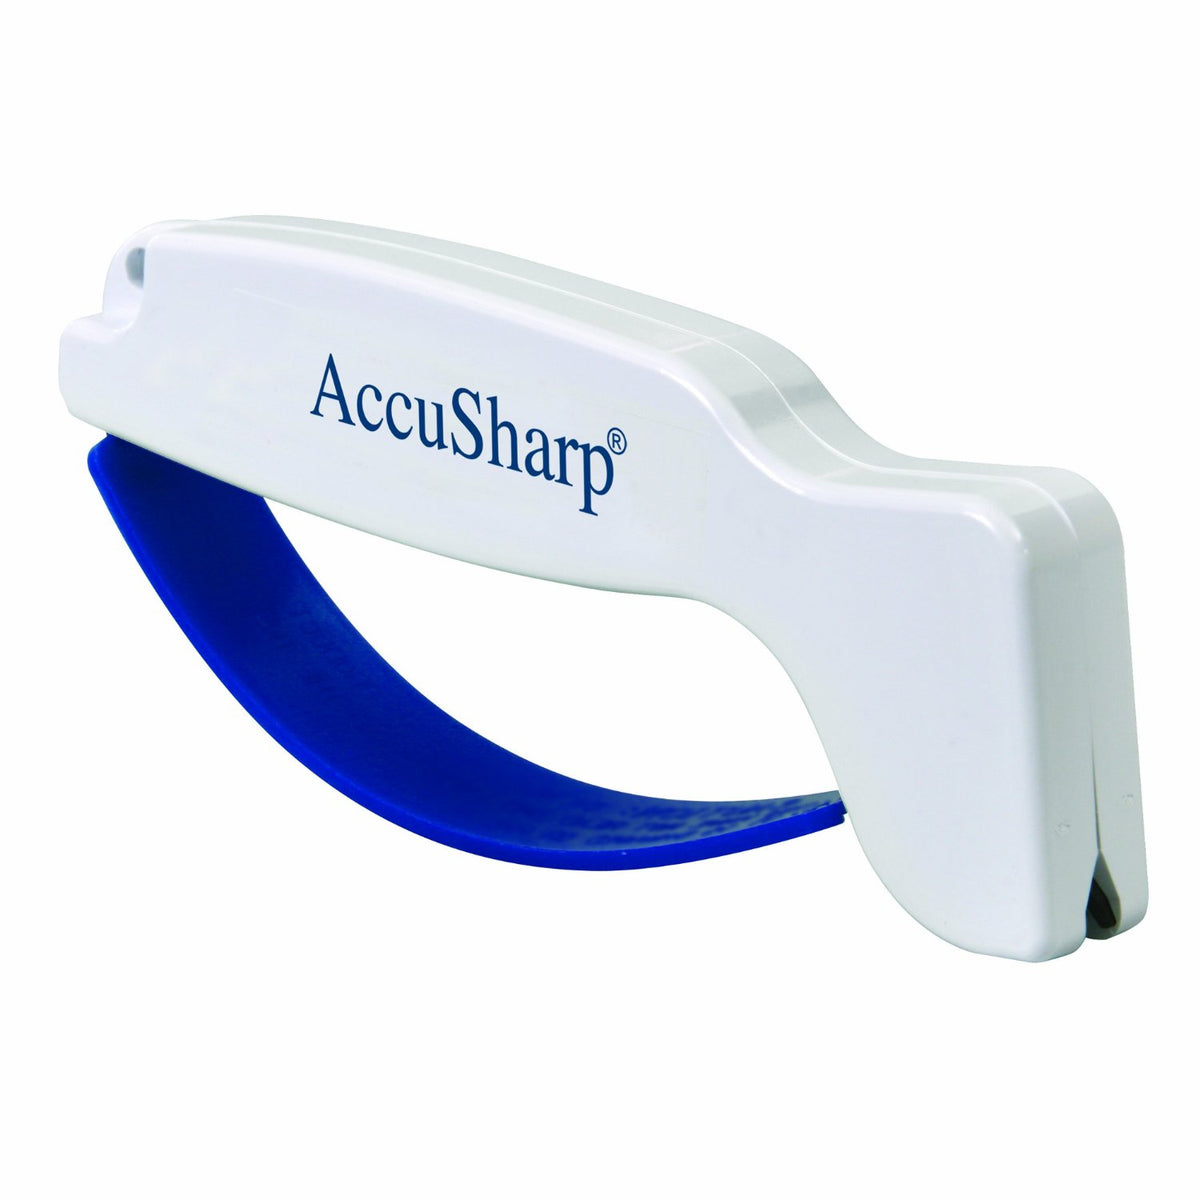 Buy accusharp 001 - Online store for kitchenware, knife sharpeners in USA, on sale, low price, discount deals, coupon code